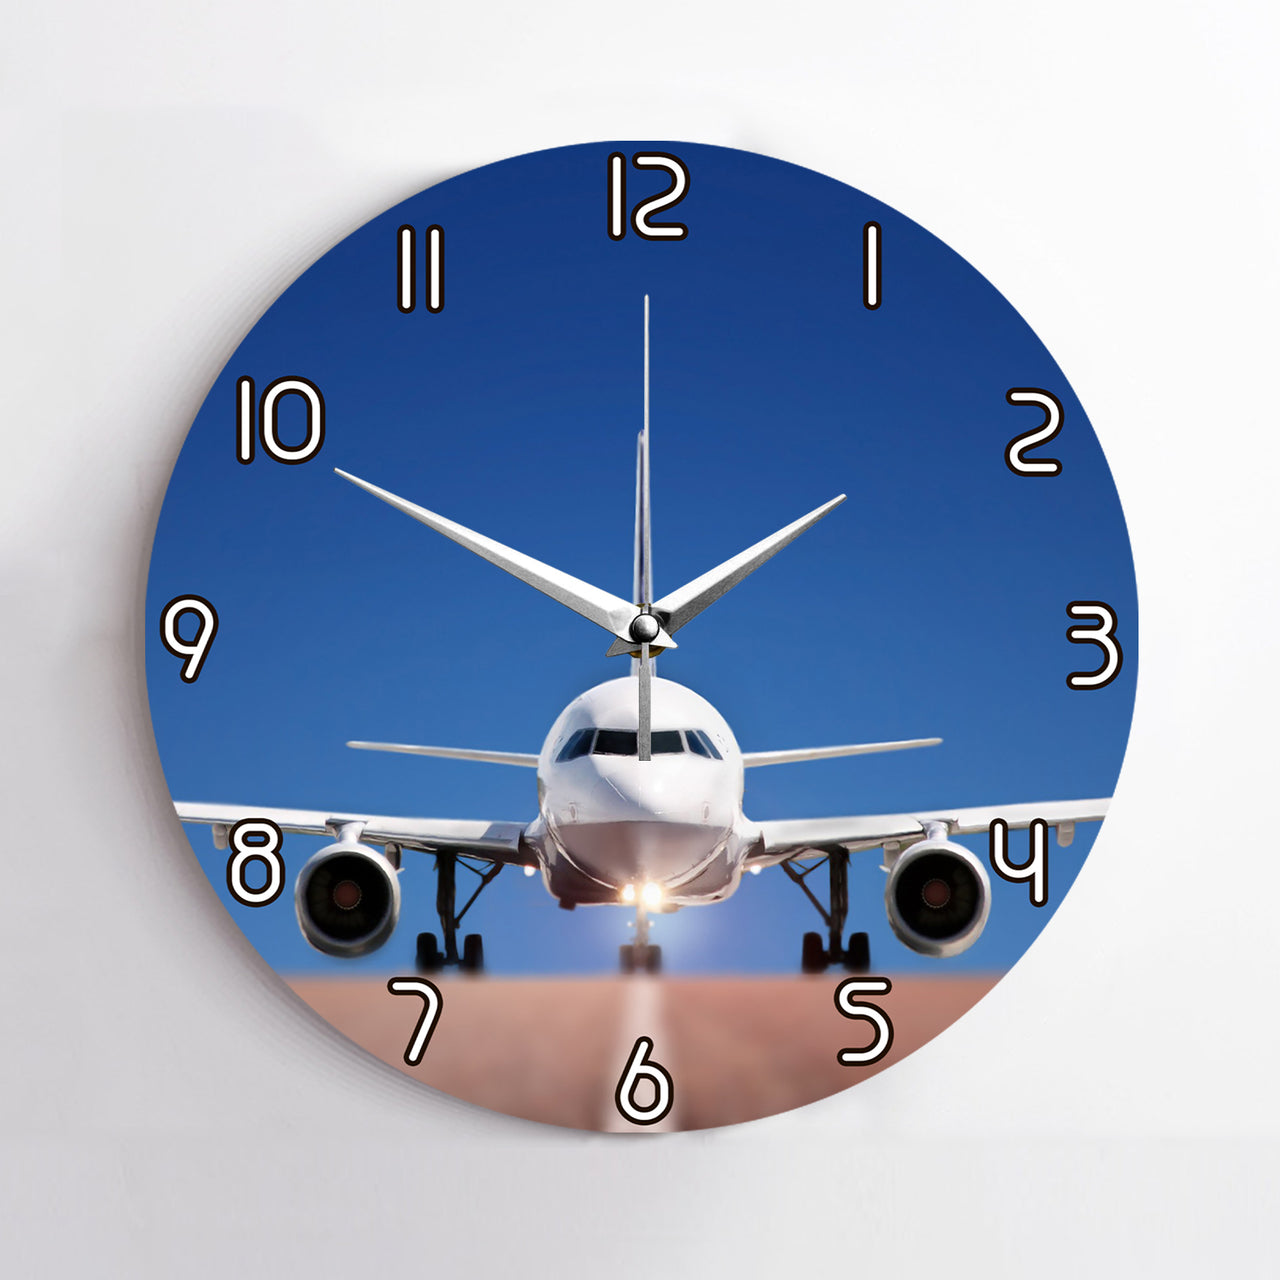 Face to Face with Airbus A320 Printed Wall Clocks